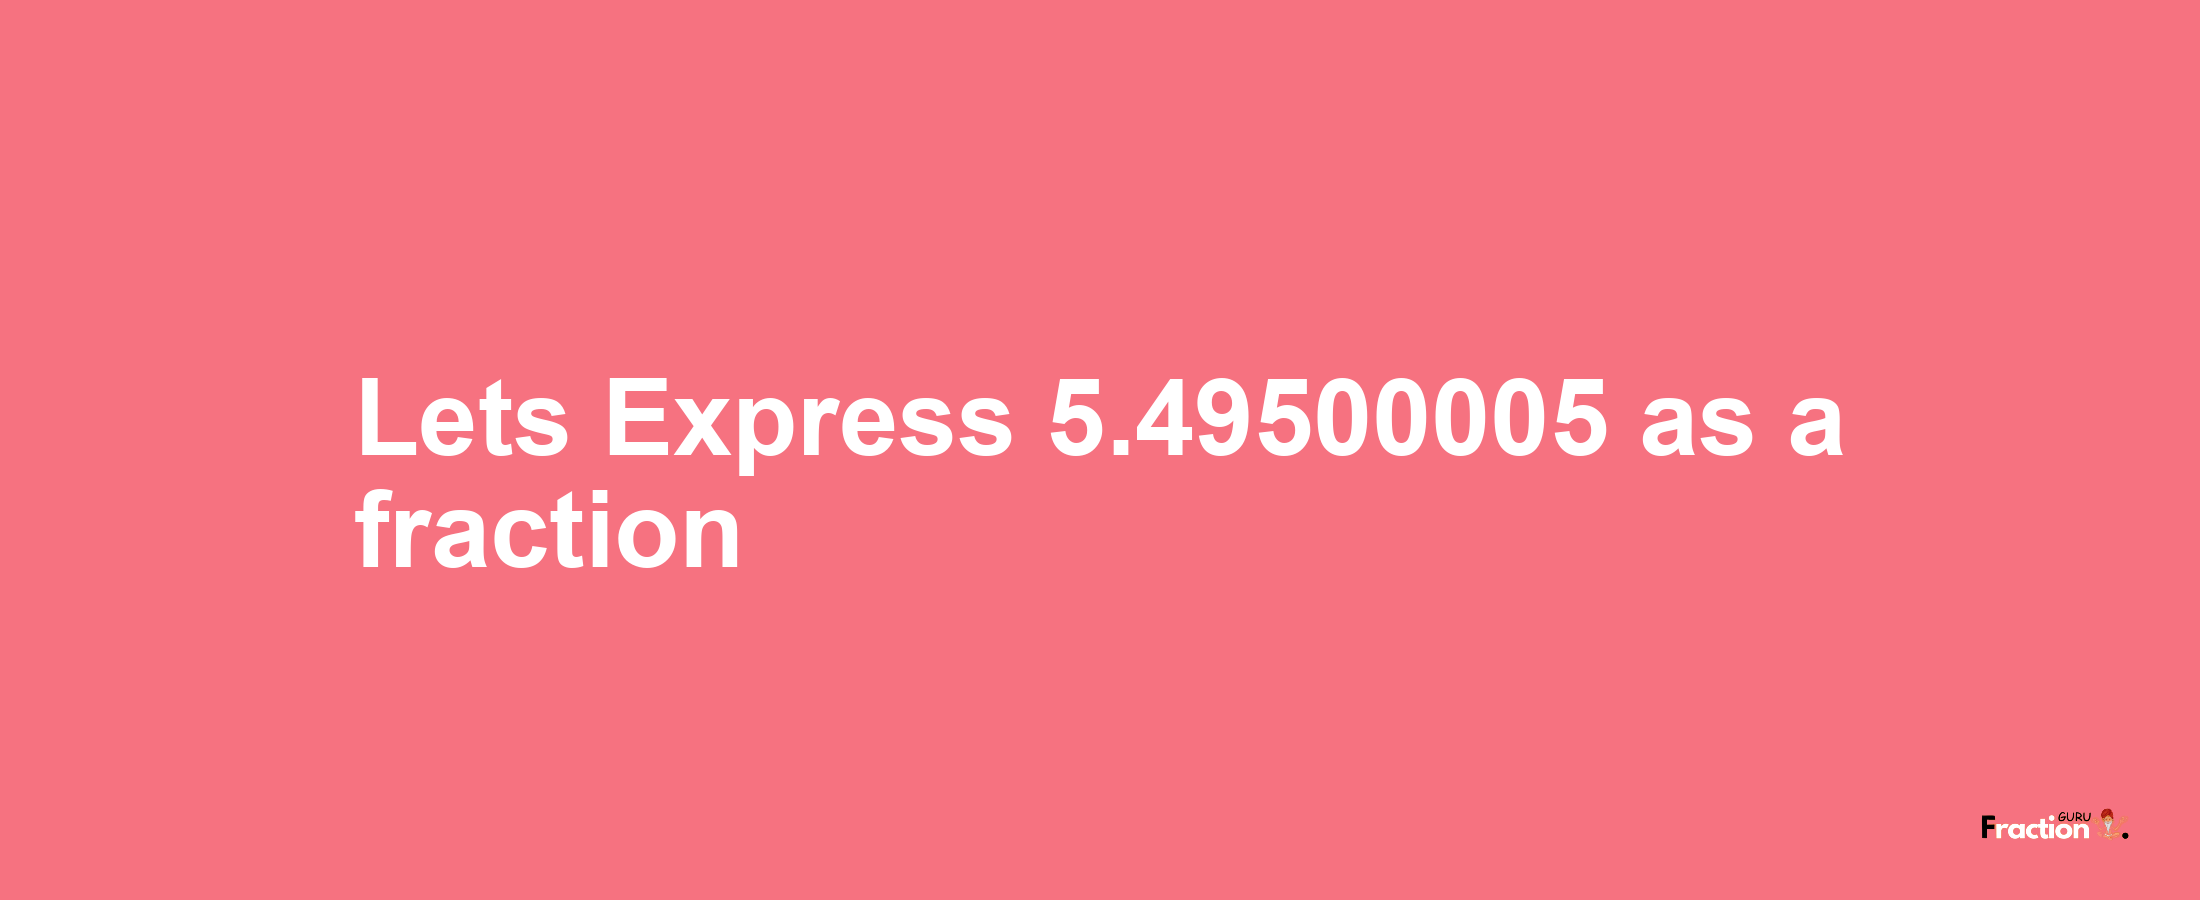 Lets Express 5.49500005 as afraction